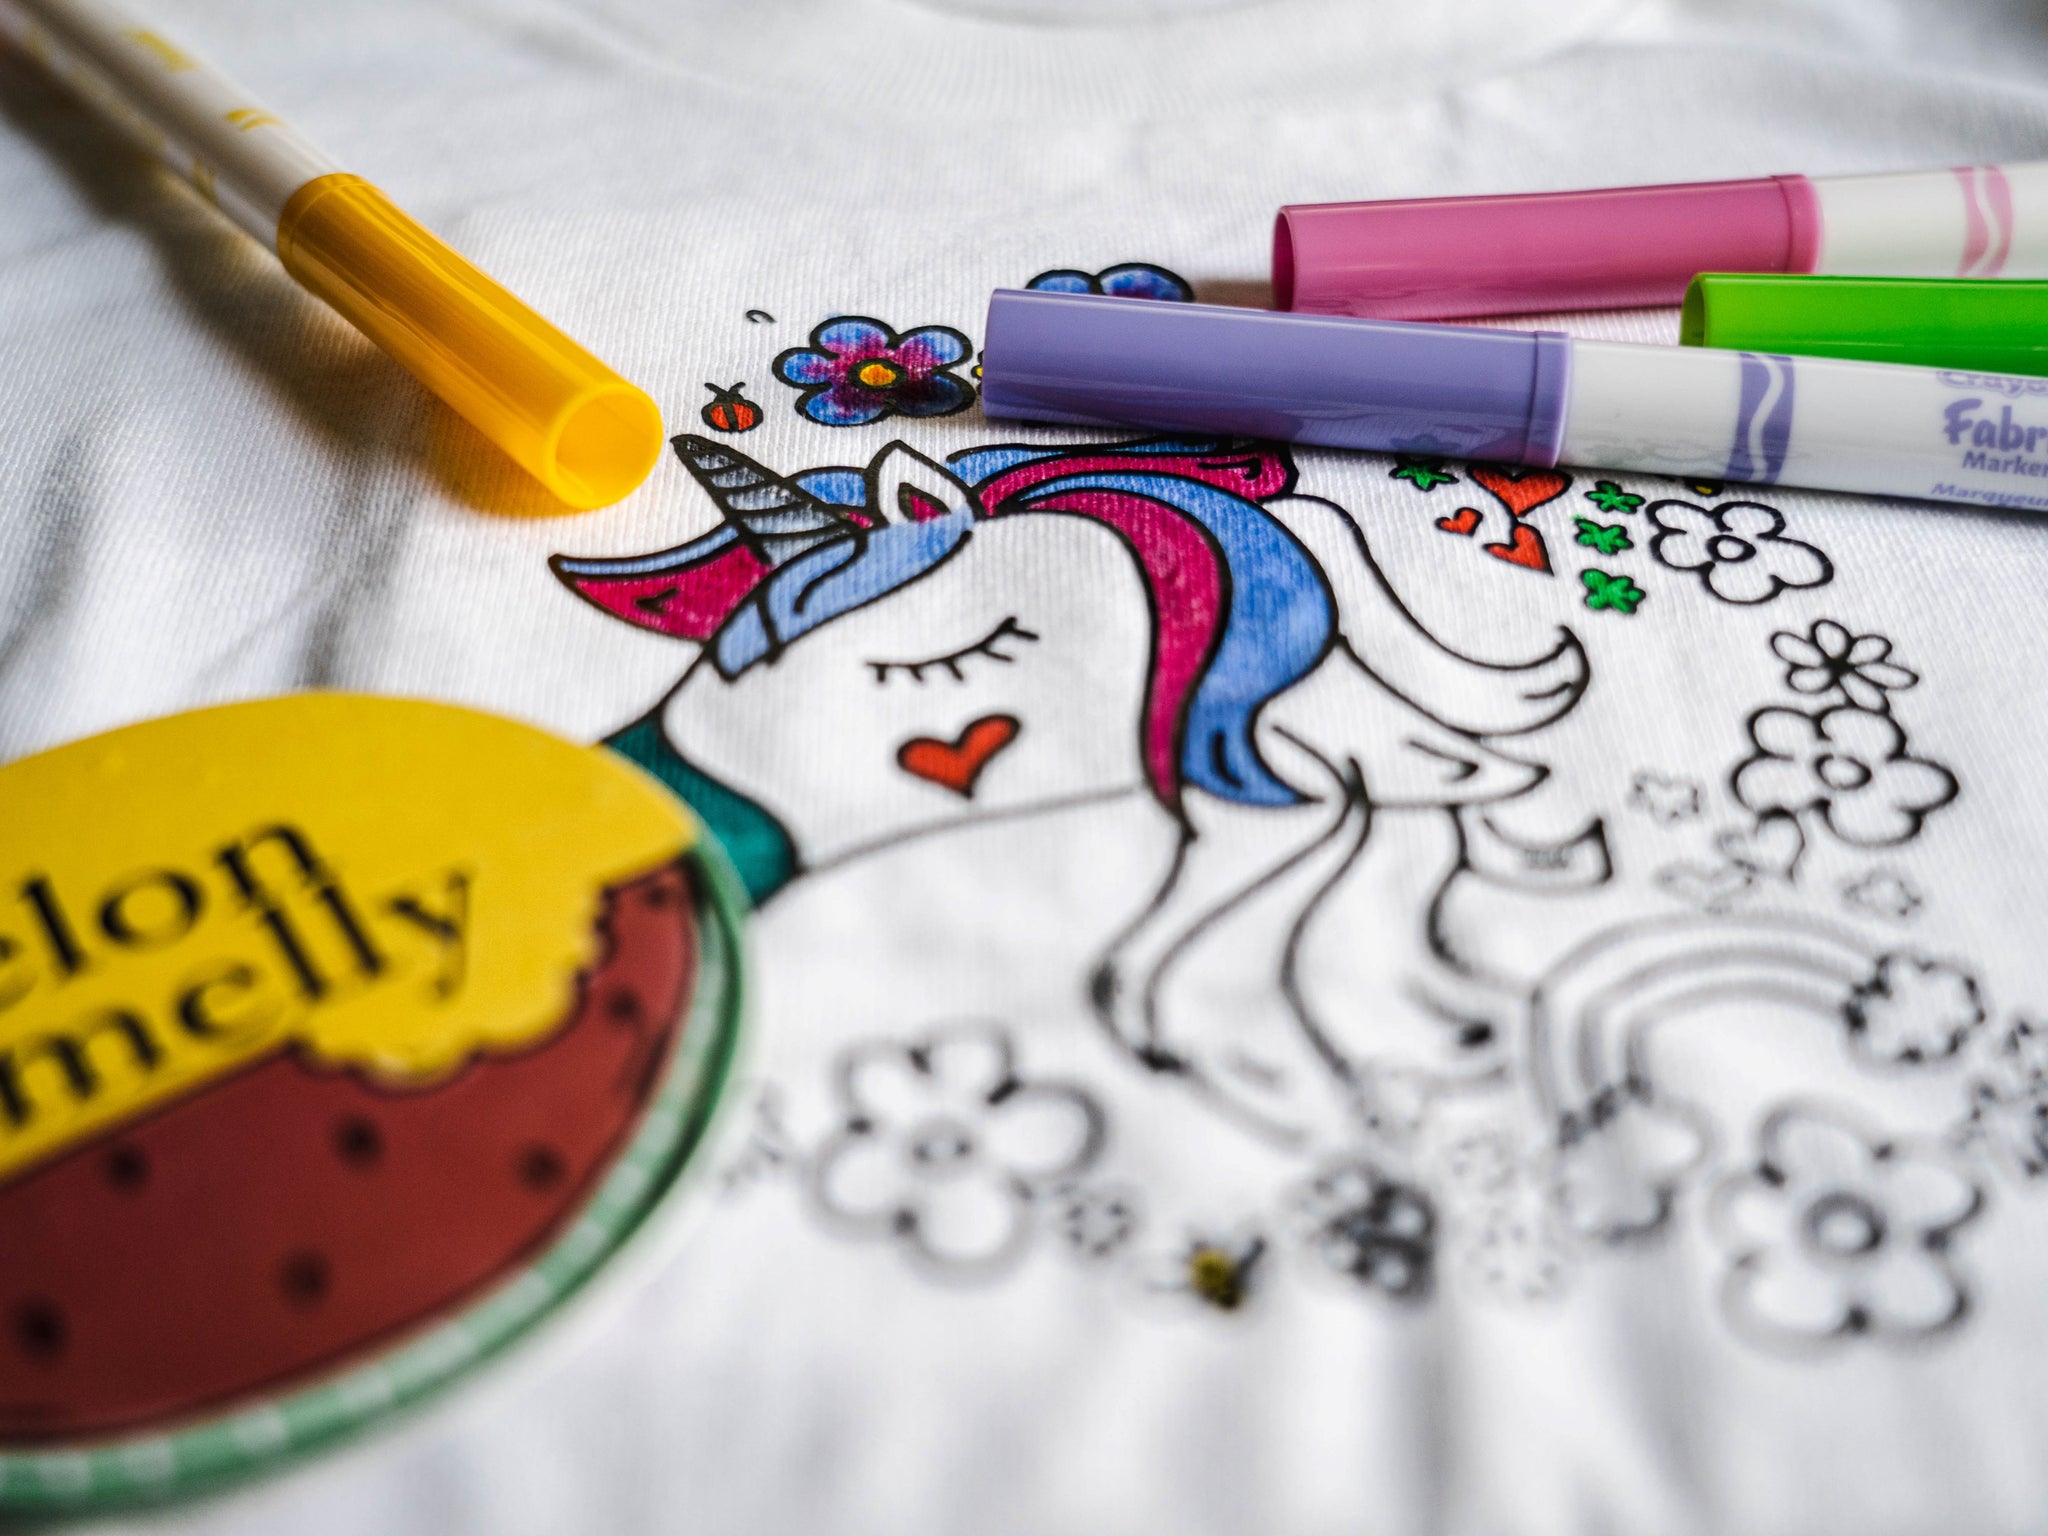 Unicorn Kids Gift Set MARKERS INCLUDED Coloring Book Shirt